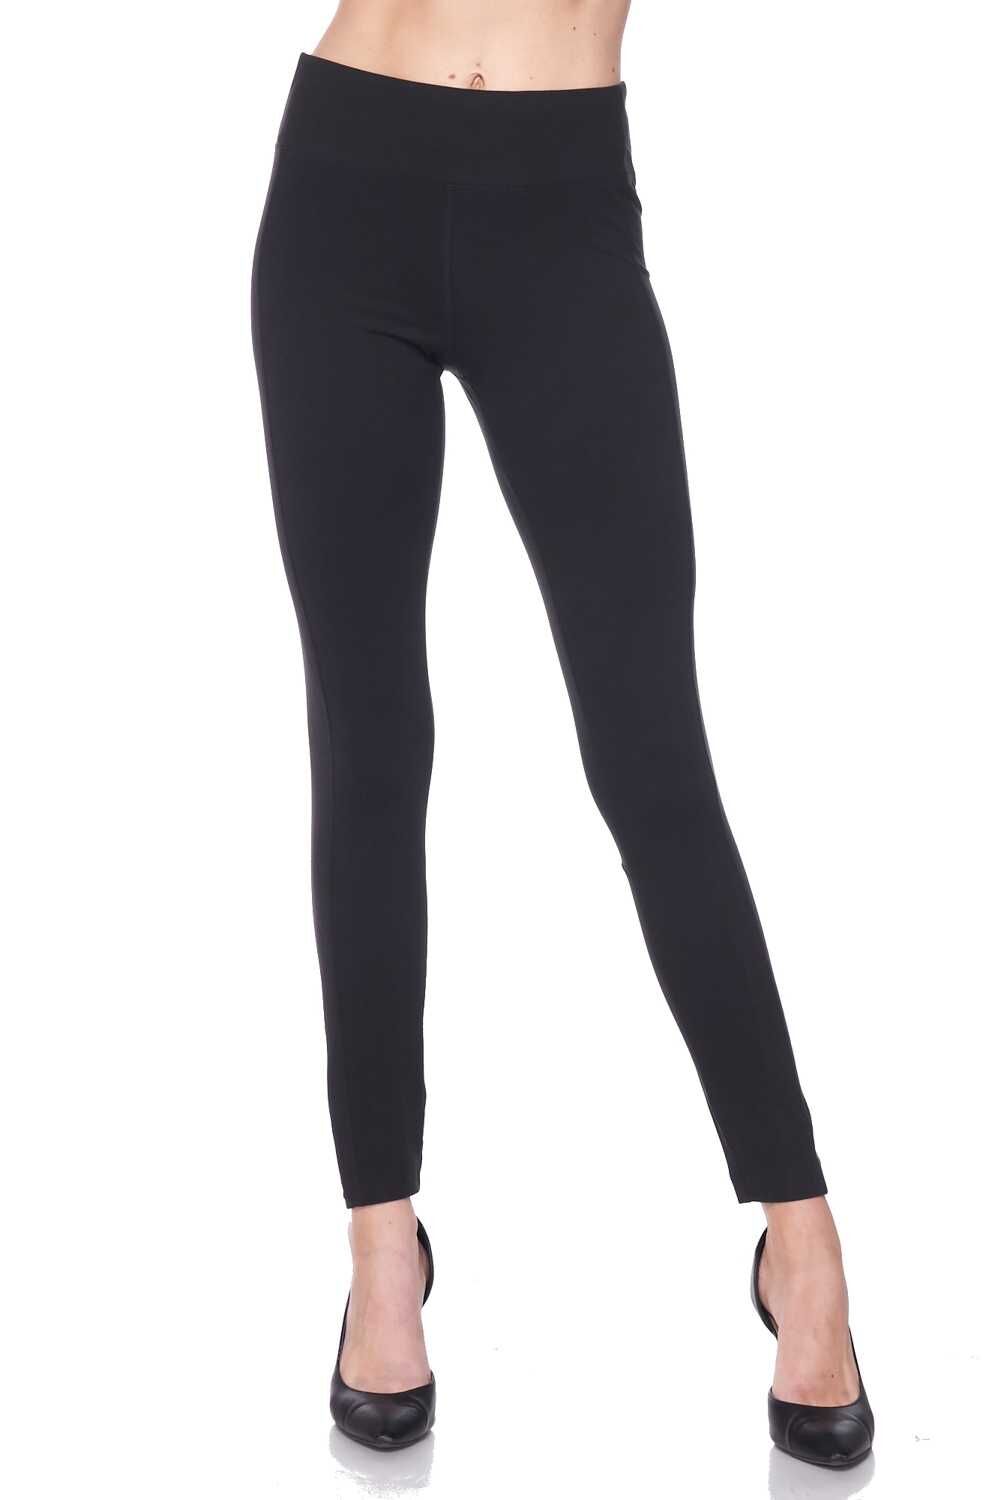 Solid Color 3 Inch High Waisted Brush Leggings with Inside Pocket - Its ...